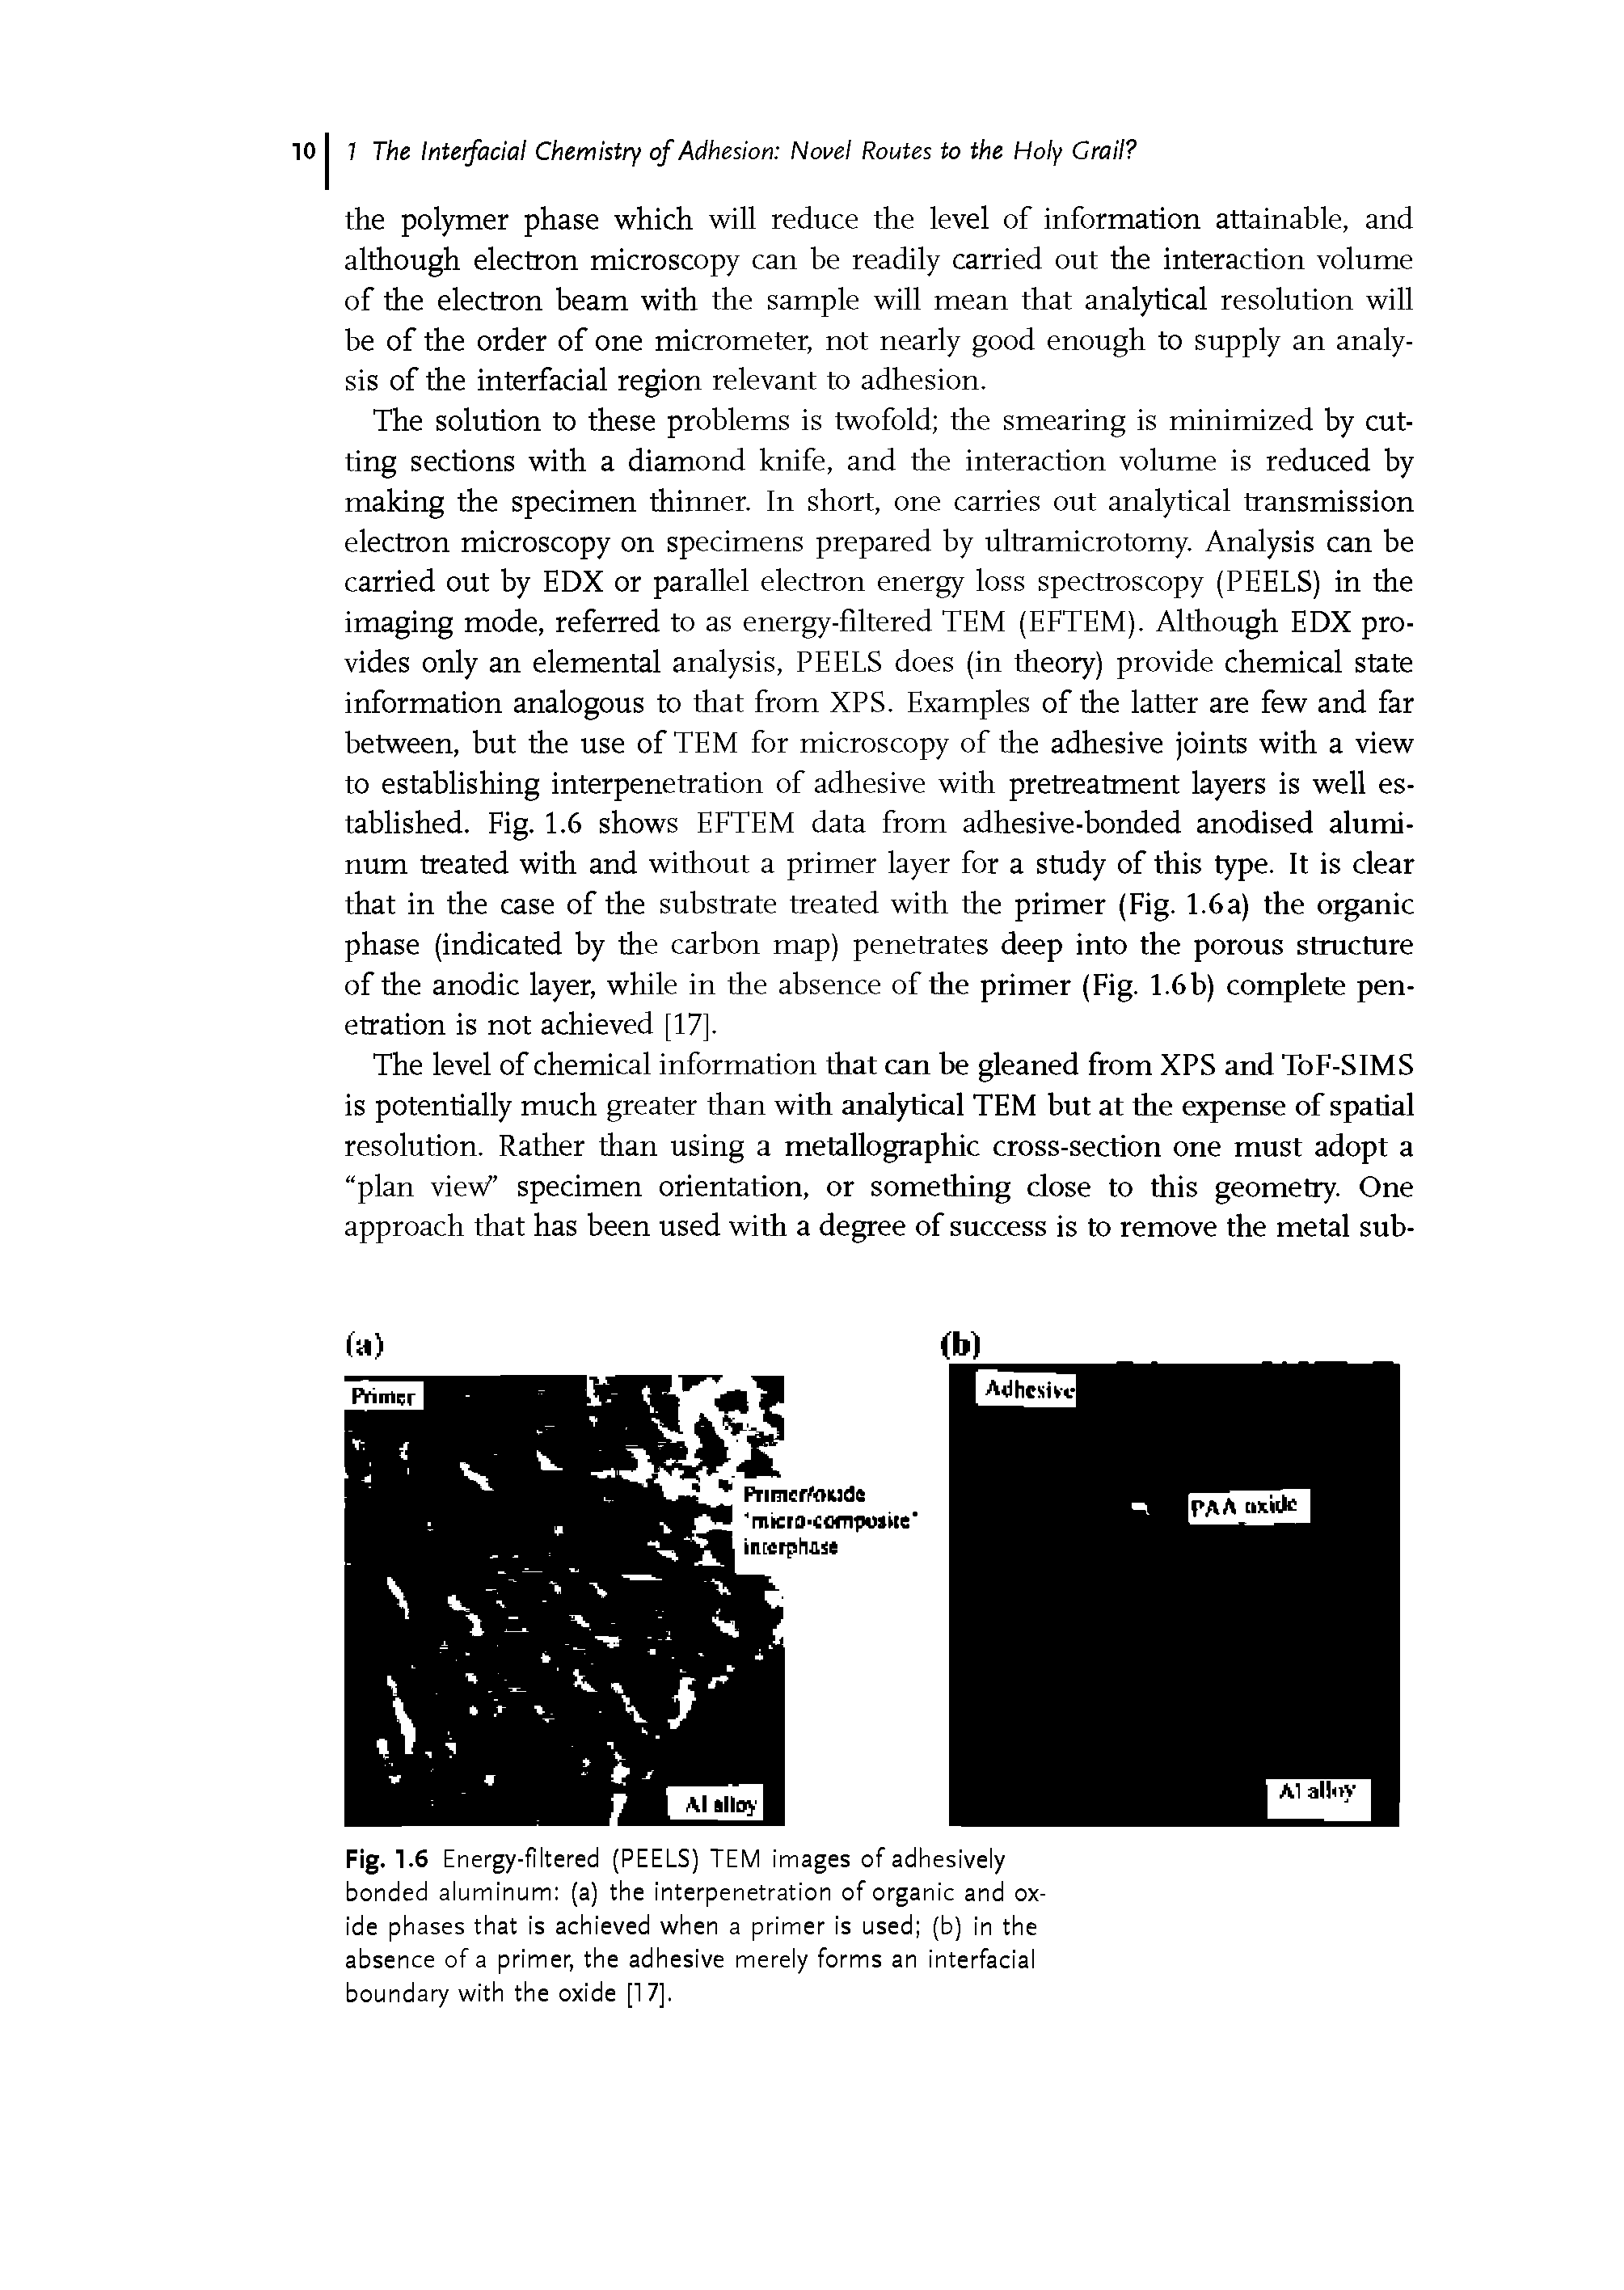 Fig. 1.6 E nergy-filtered (PEELS) TEM images of adhesively bonded aluminum (a) the interpenetration of organic and oxide phases that is achieved when a primer is used (b) in the absence of a primer, the adhesive merely forms an interfaclal boundary with the oxide [1 7].